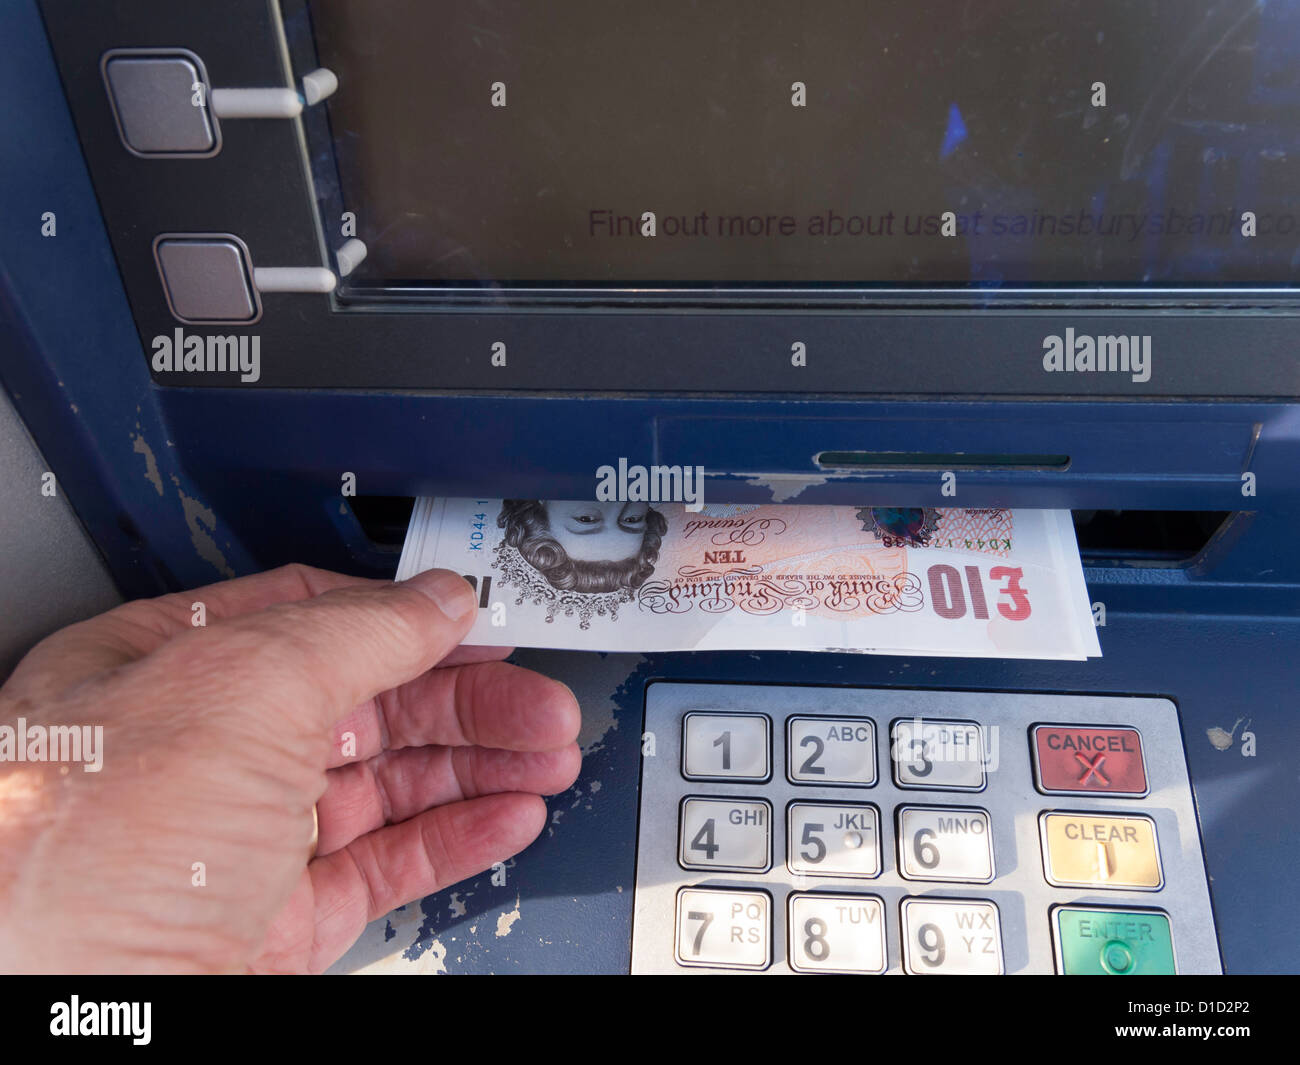 A man's hand taking £100 cash dispensed by a bank's ATM machine Stock Photo